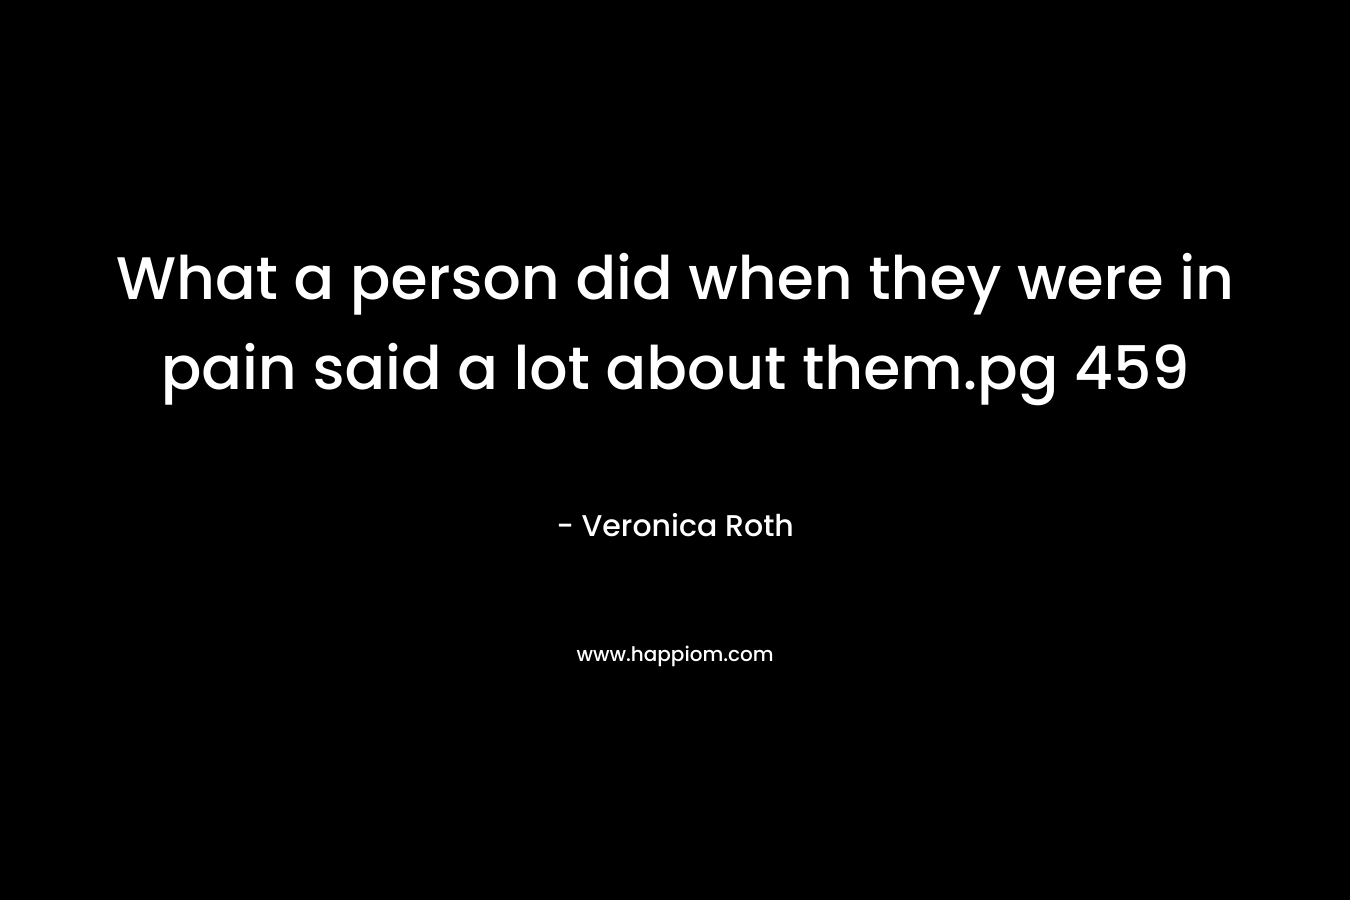 What a person did when they were in pain said a lot about them.pg 459 – Veronica Roth